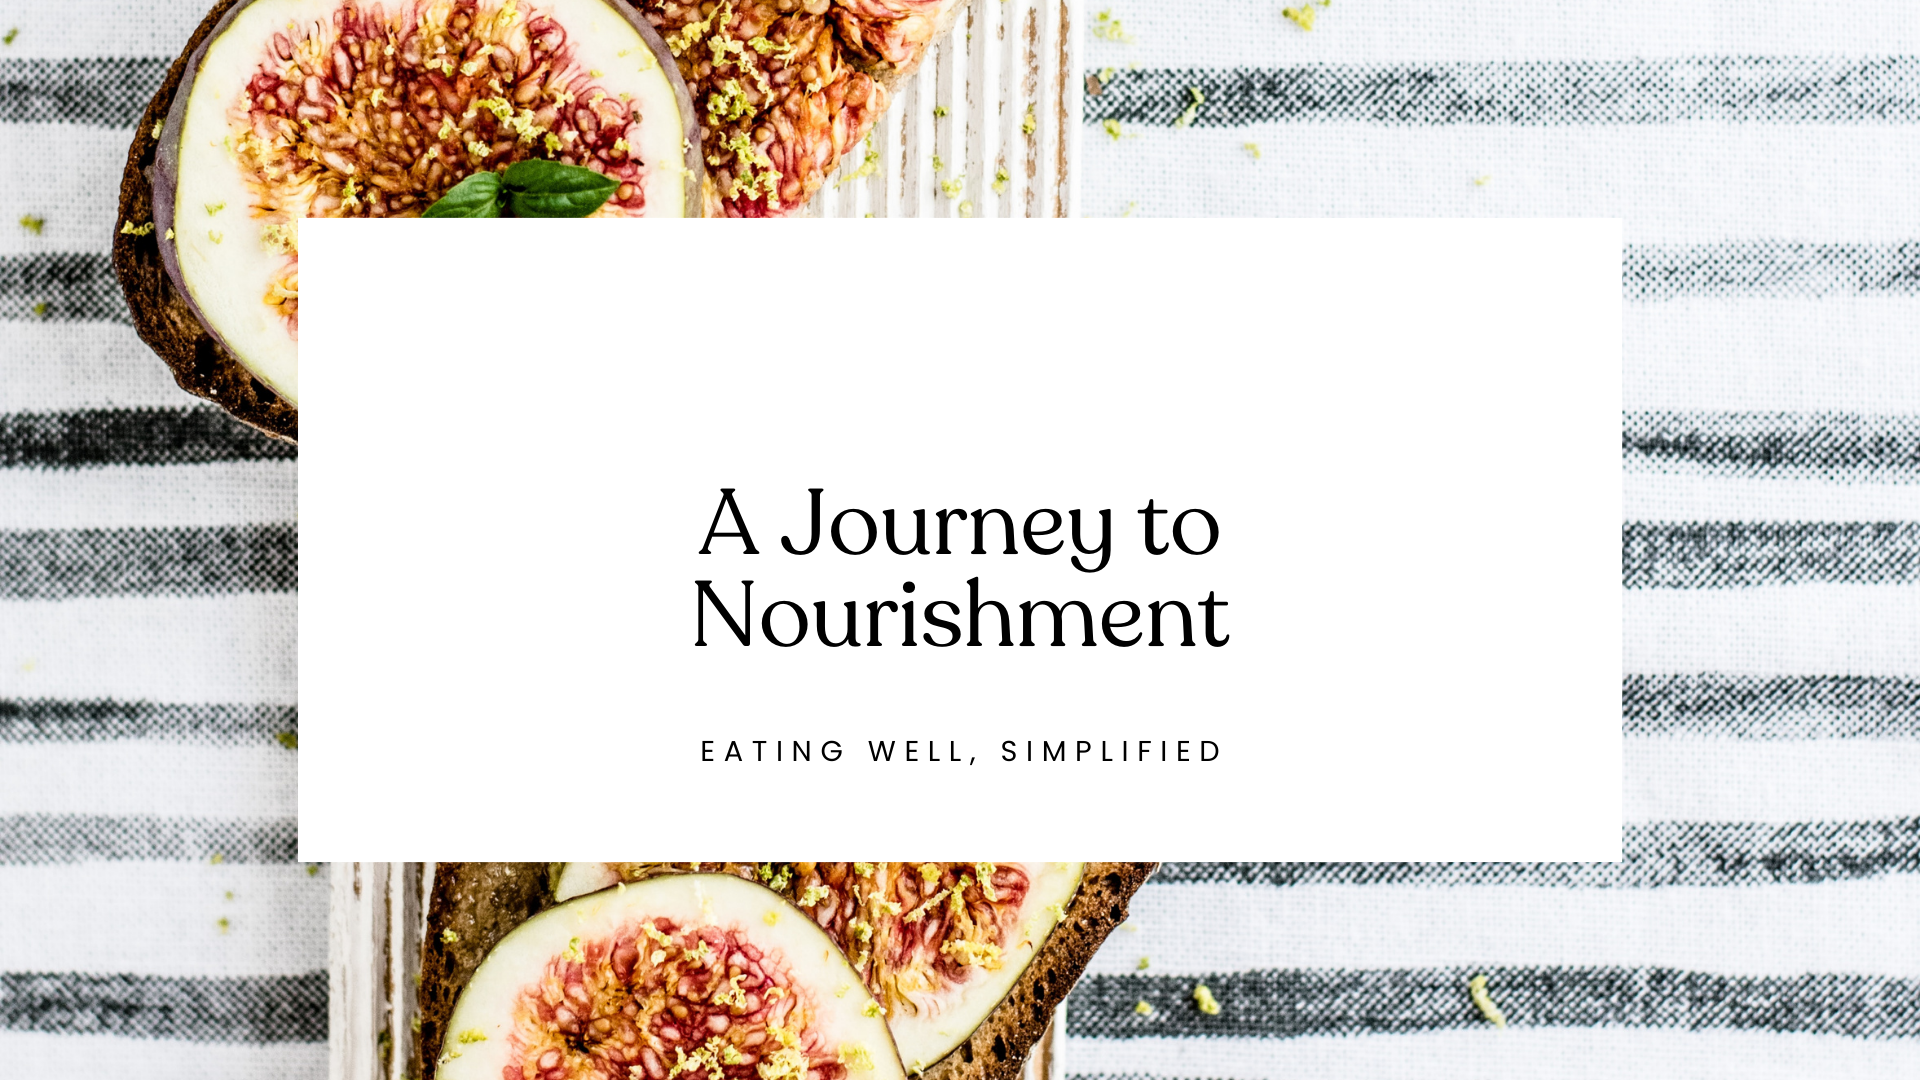 mindful journey to nourishment. https://www.info-on-high-blood-pressure.com/mindful-eating.html